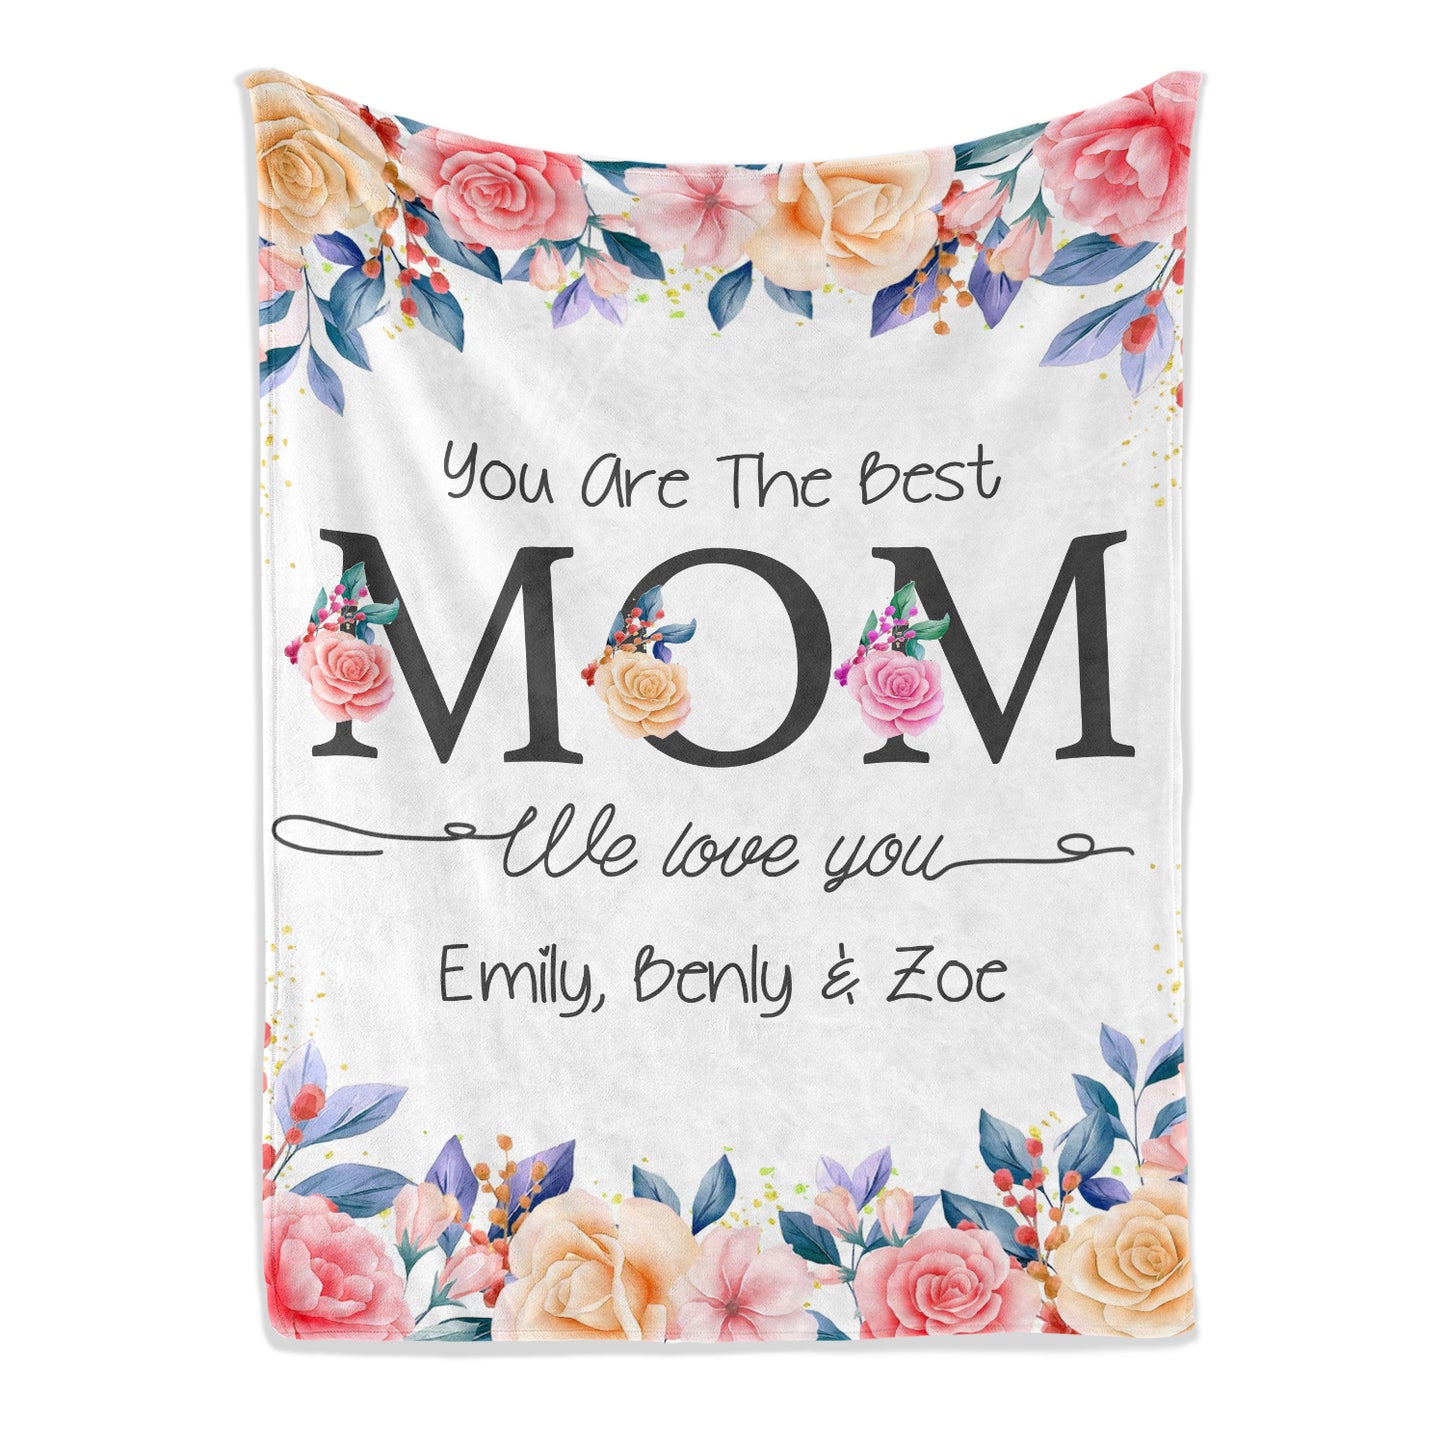 You are the best mom - Personalized Mother's Day or Birthday gift for Mom - Custom Blanket - MyMindfulGifts